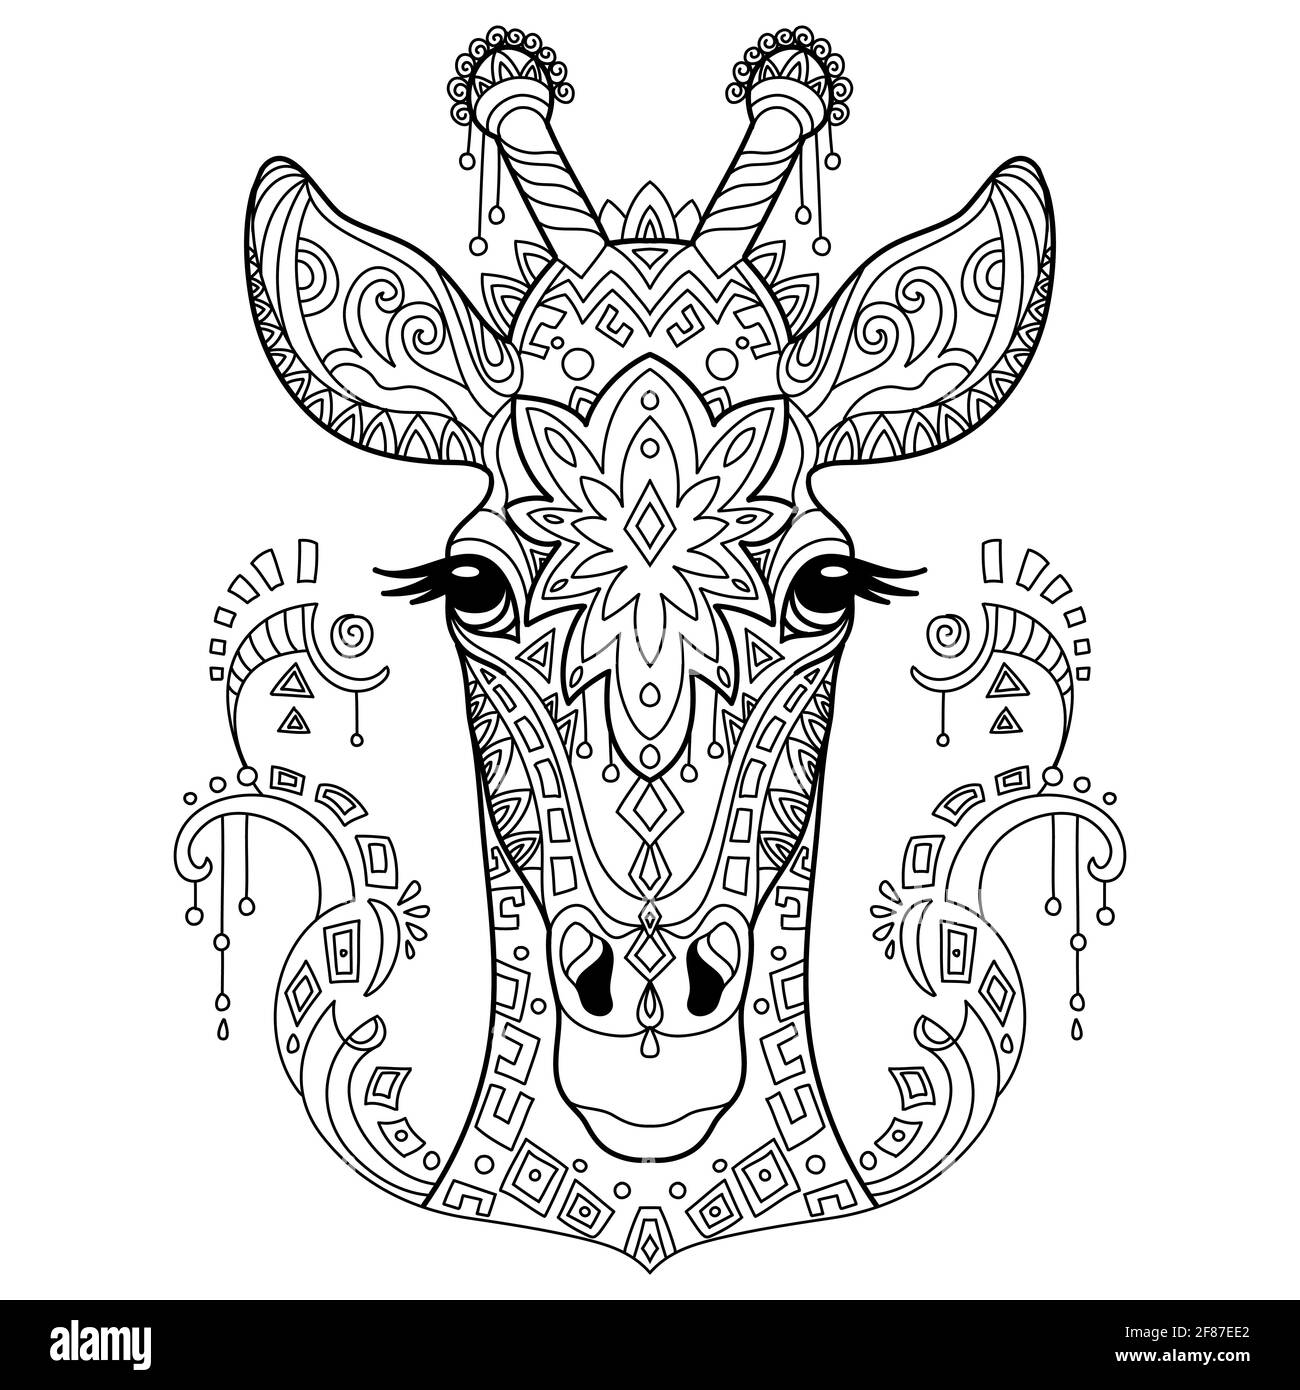 Head of giraffe. Abstract vector contour illustration isolated on white background. For adult anti stress coloring book page with doodle and zentangle Stock Vector